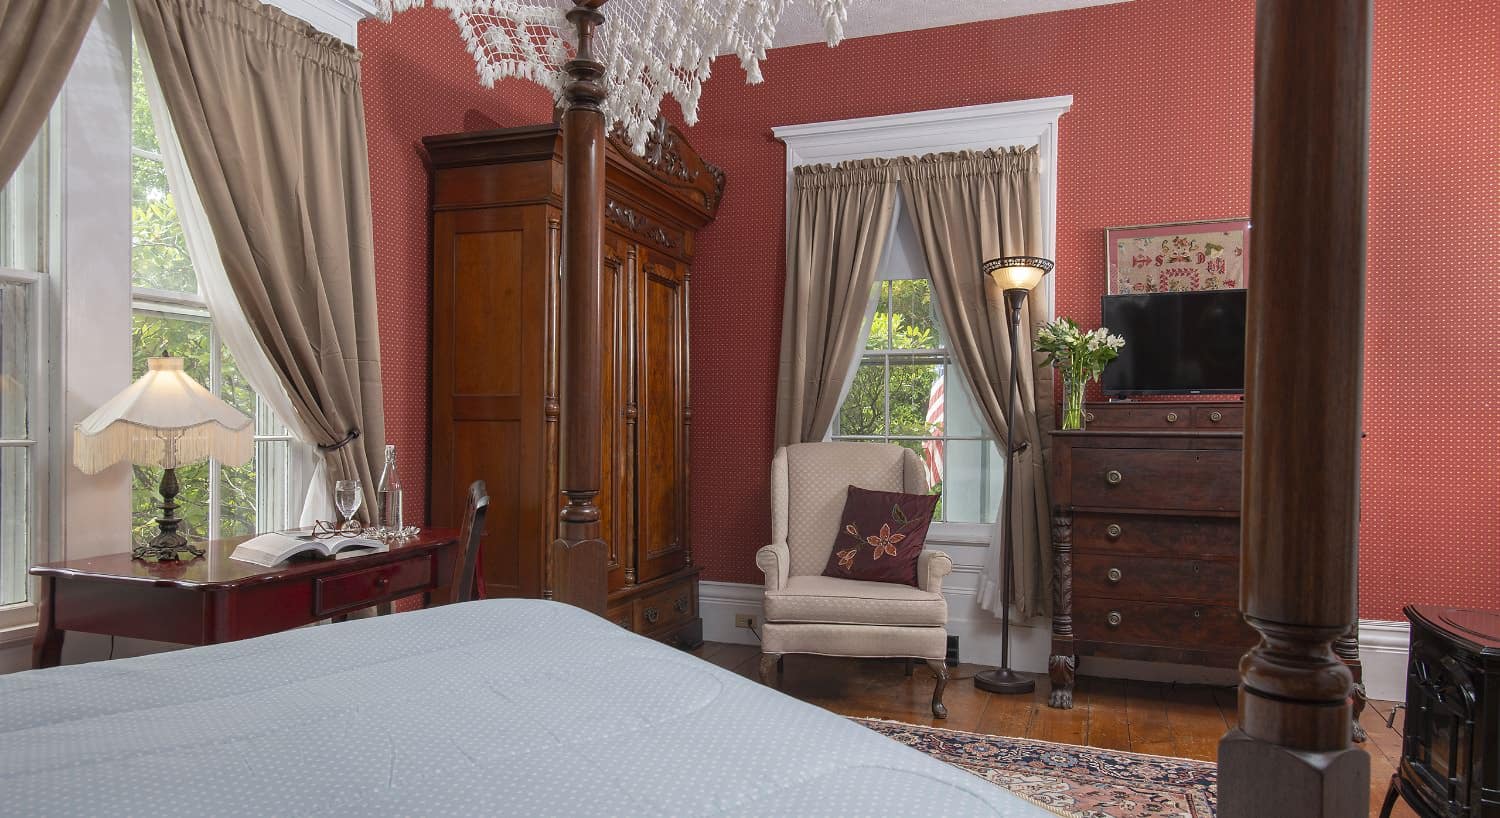 Bedroom with burgundy wallpaper, hardwood flooring, bed with light blue bedding, wooden desk, cream upholstered antique arm chair, and dark wooden hutch and dresser